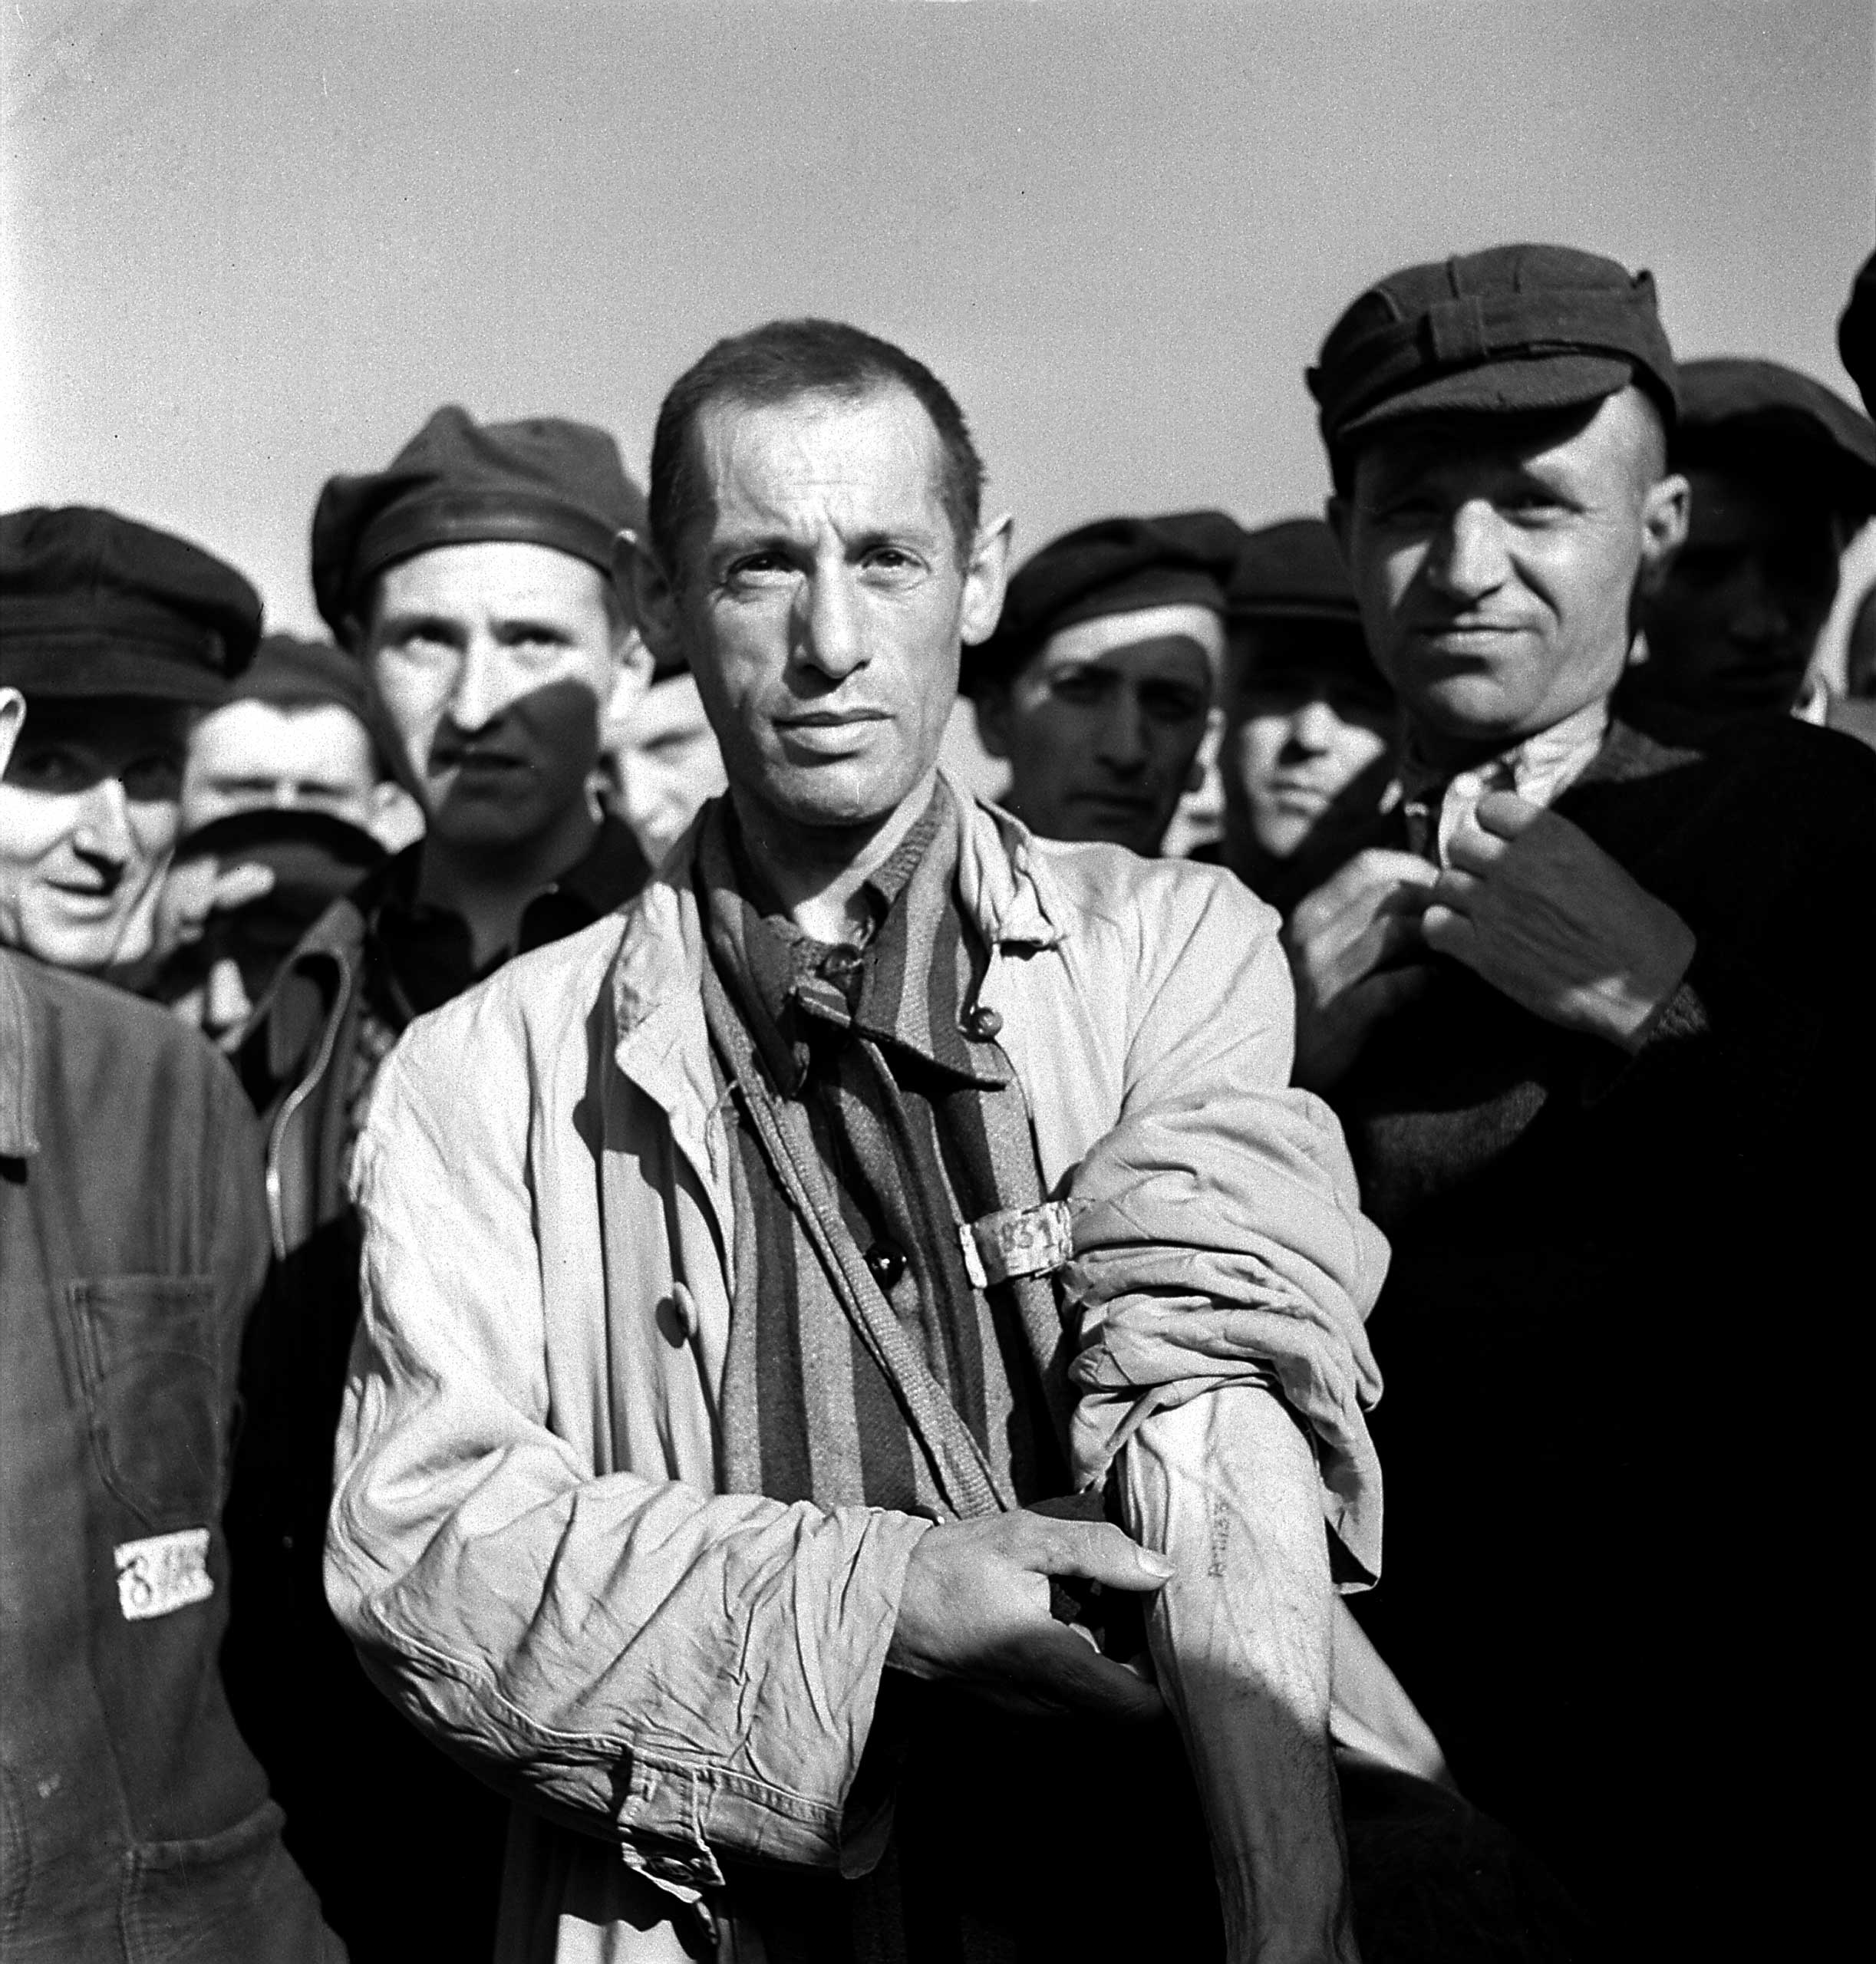 Not published in LIFE. Prisoners at Buchenwald display their identification tattoos shortly after camp's liberation by Allied forces, April 1945.